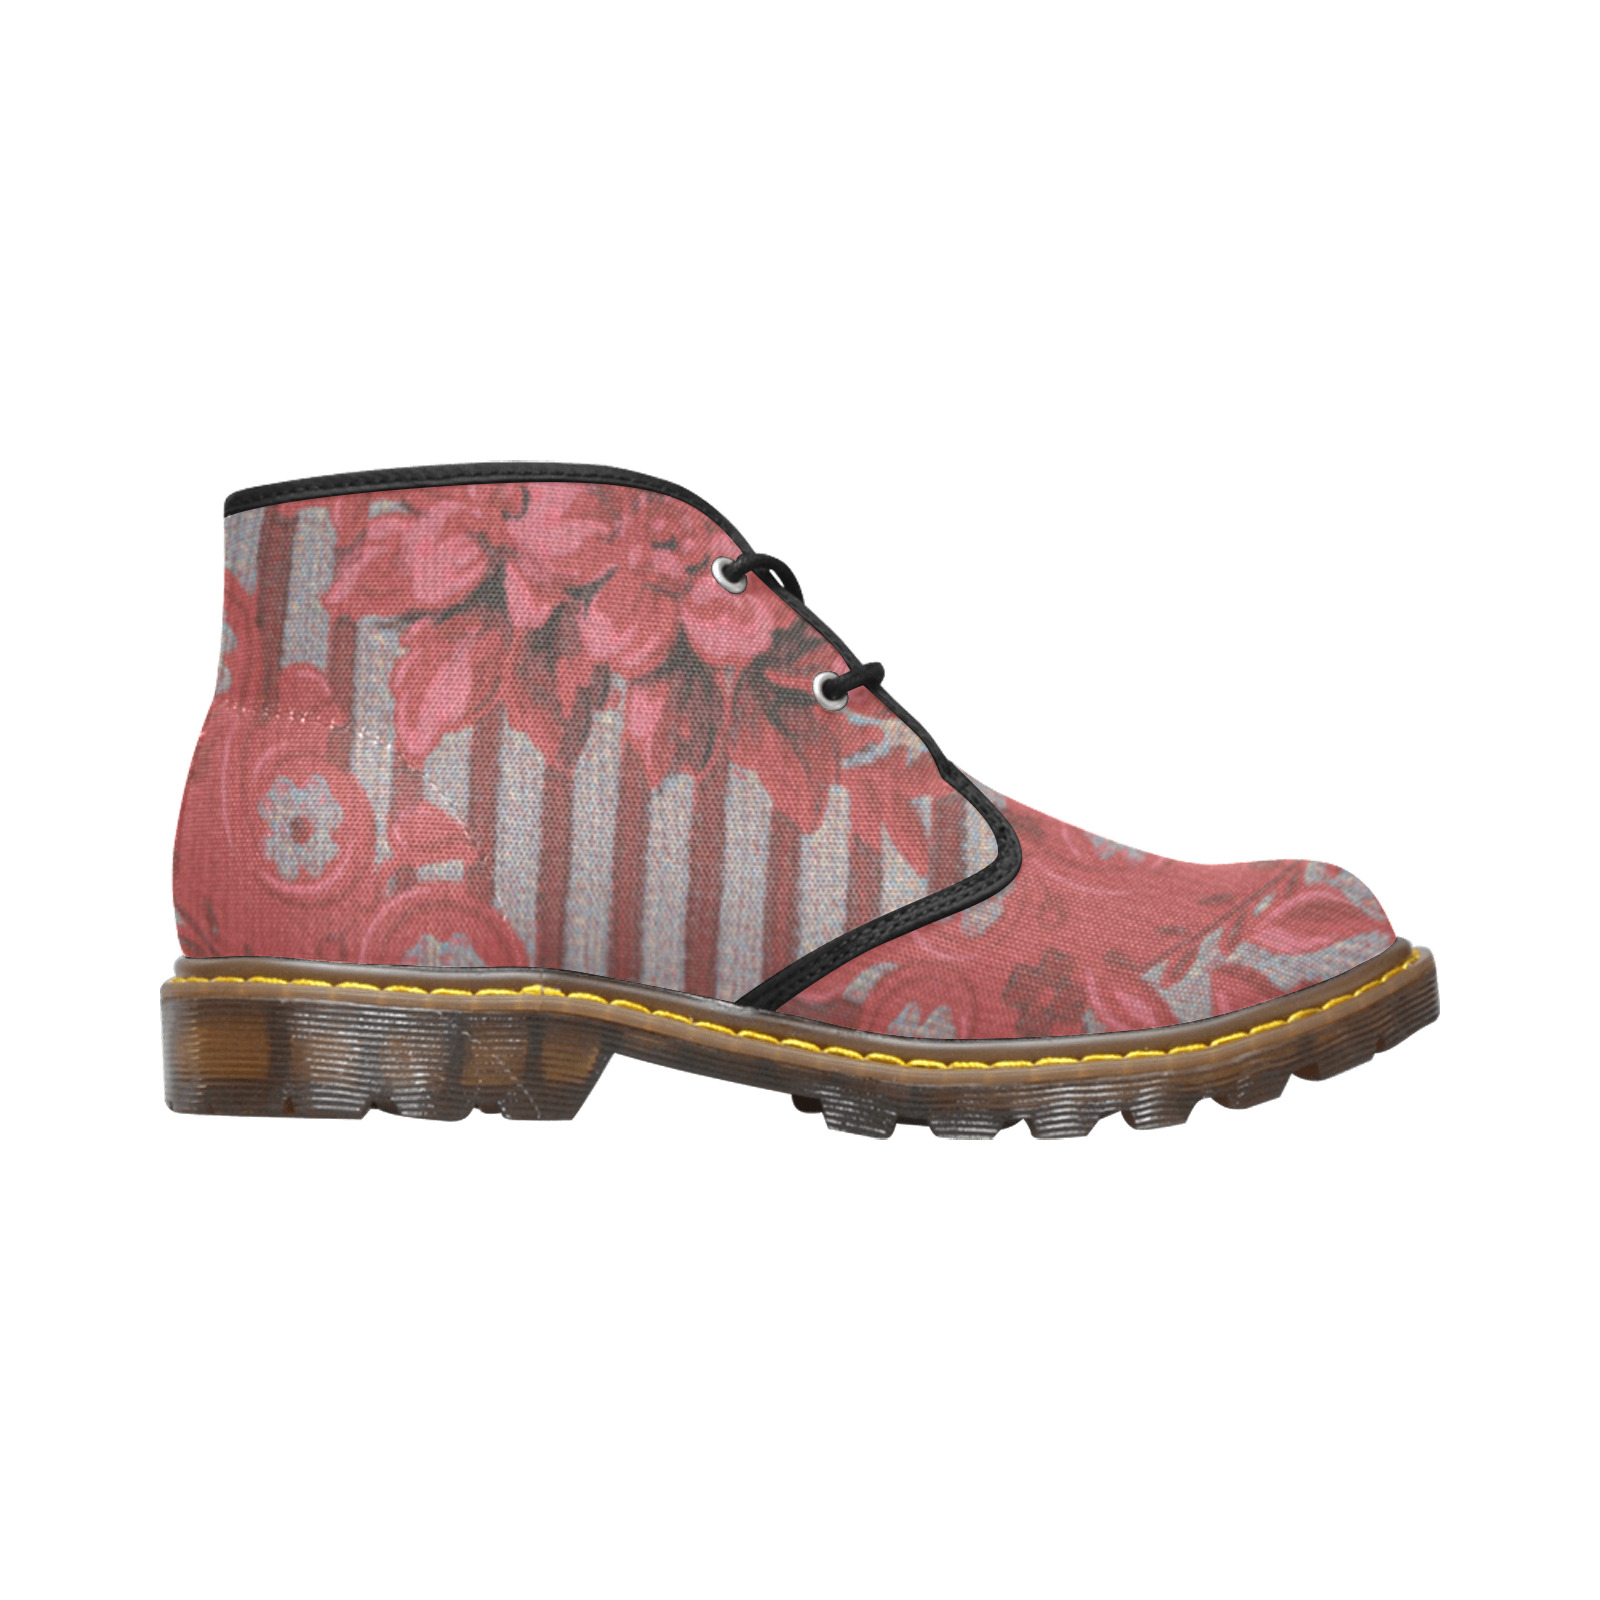 Steampunk red baroque Women's Canvas Chukka Boots (Model 2402-1)